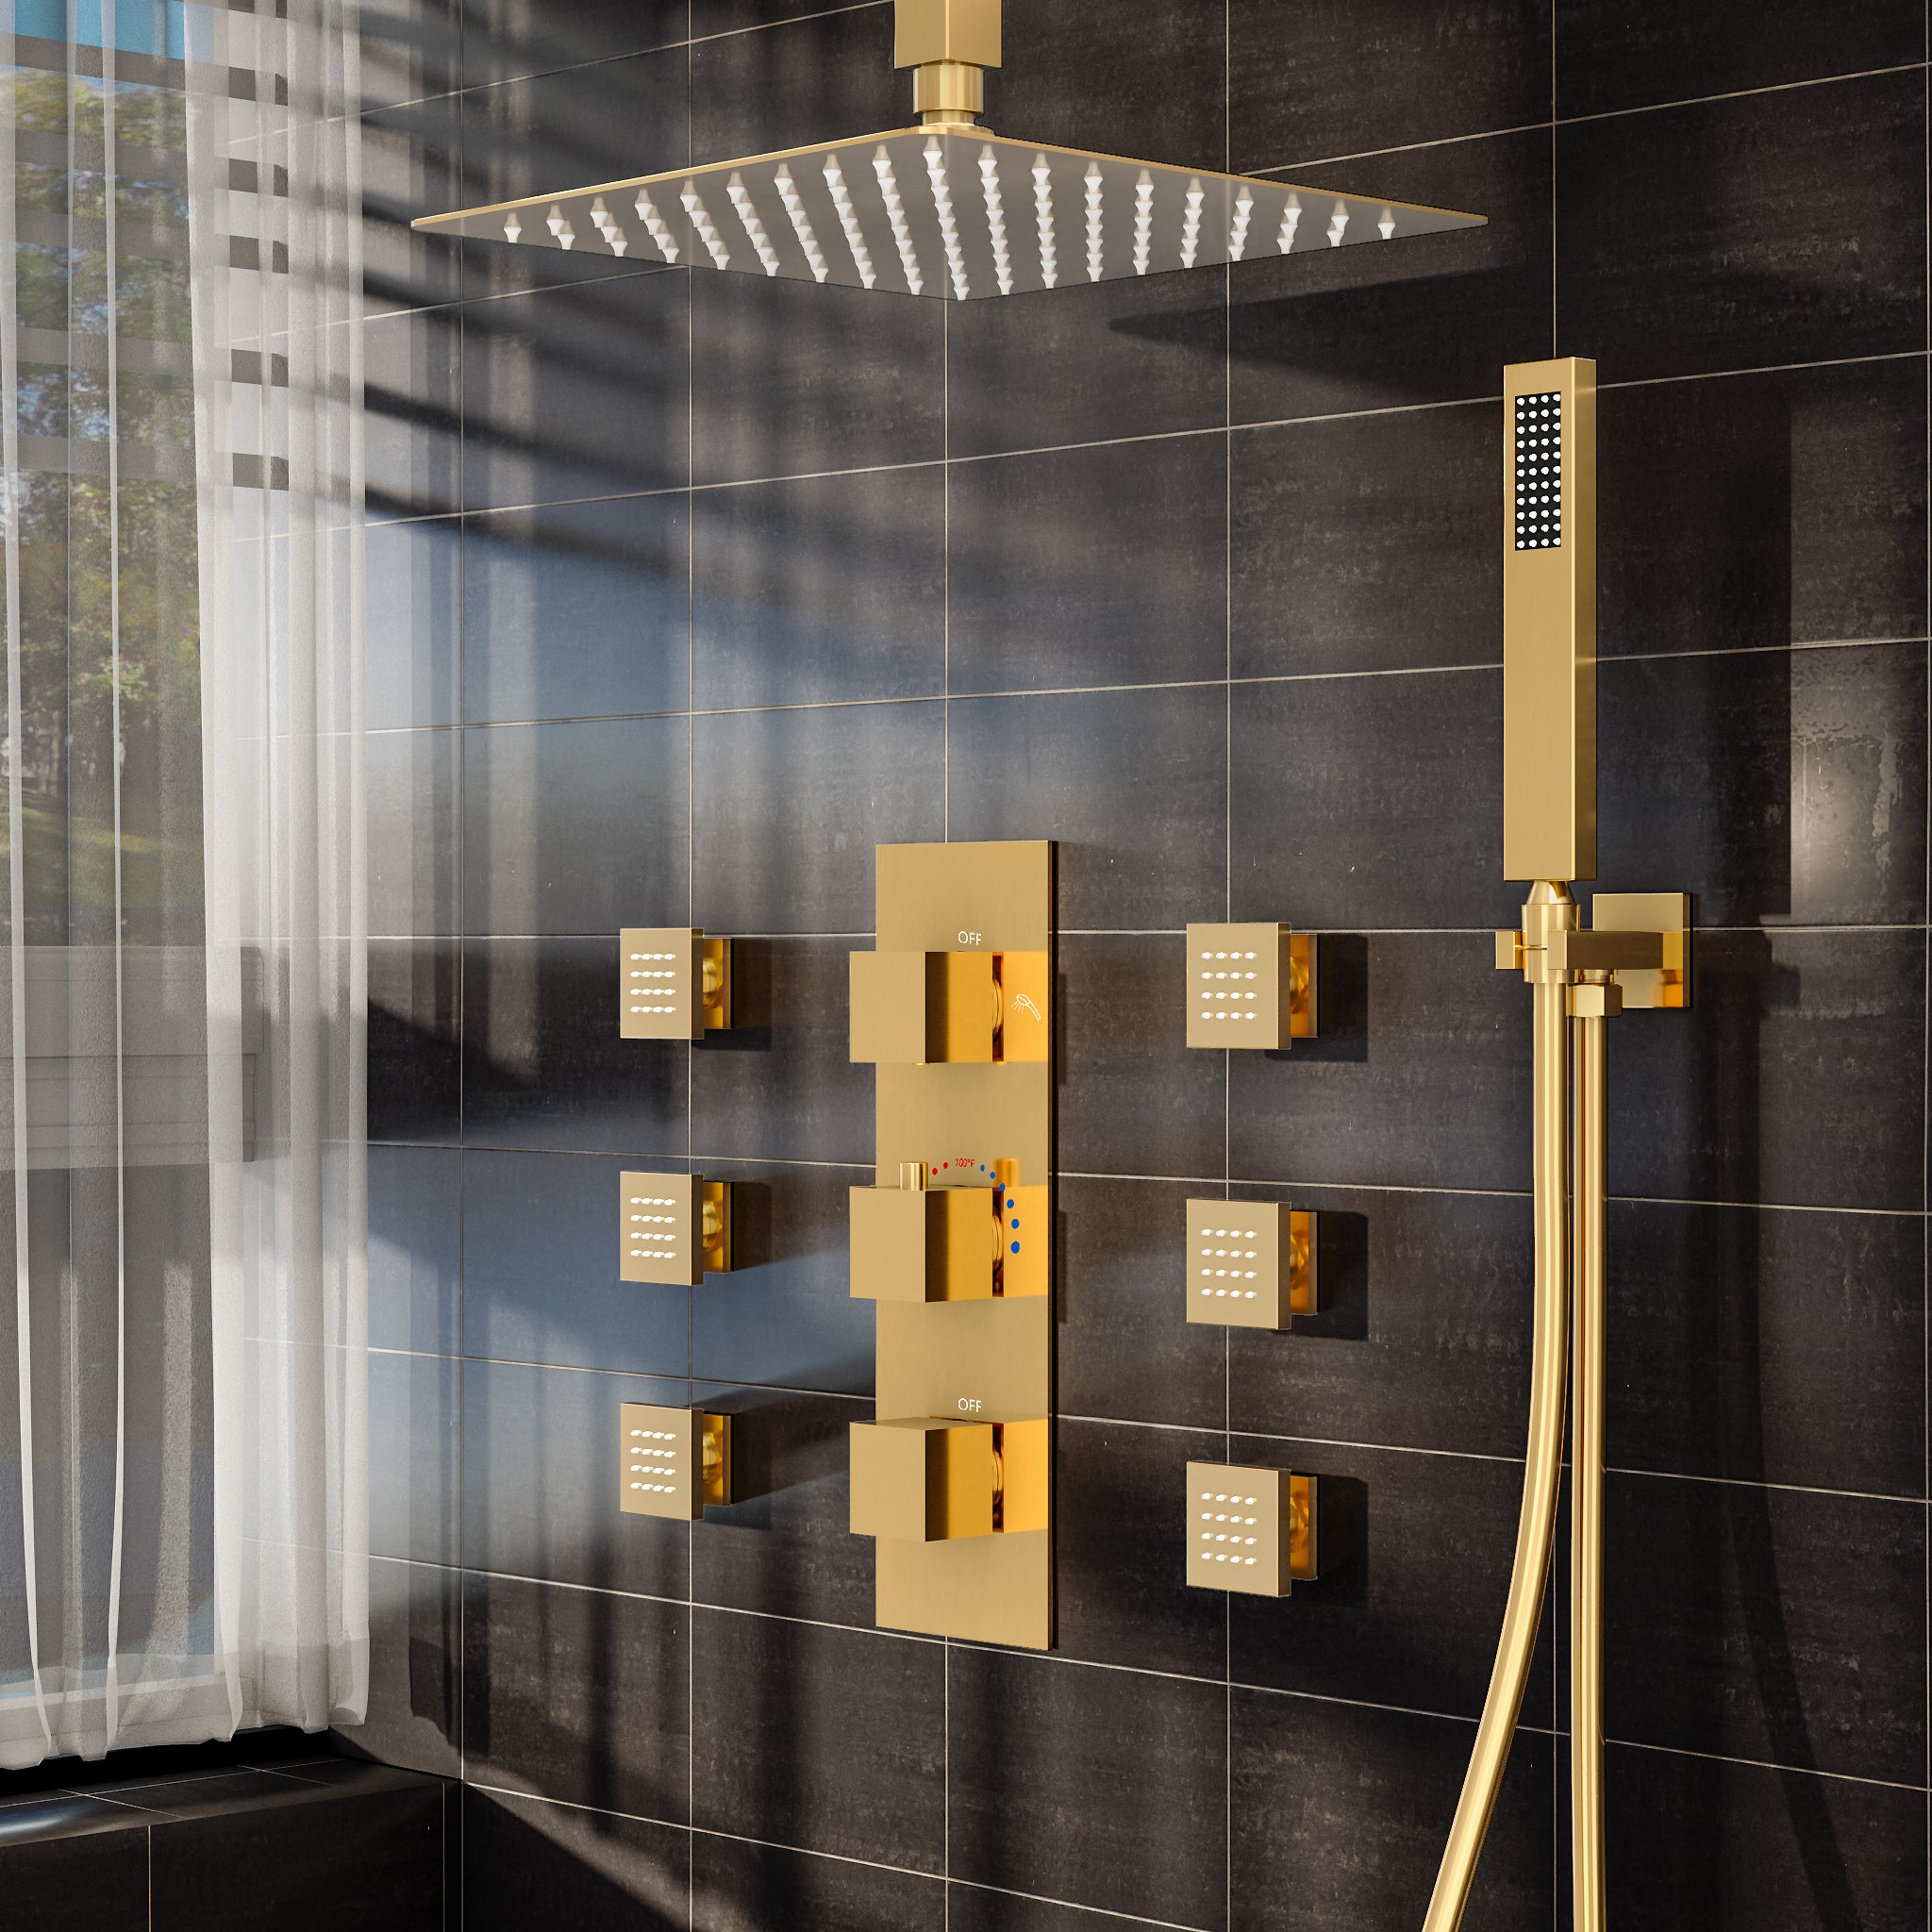 EVERSTEIN Luxury Shower System with Body Massage Jets & 12" High Pressure Ceiling Rainfall Shower Head, Brushed Gold Faucet Set